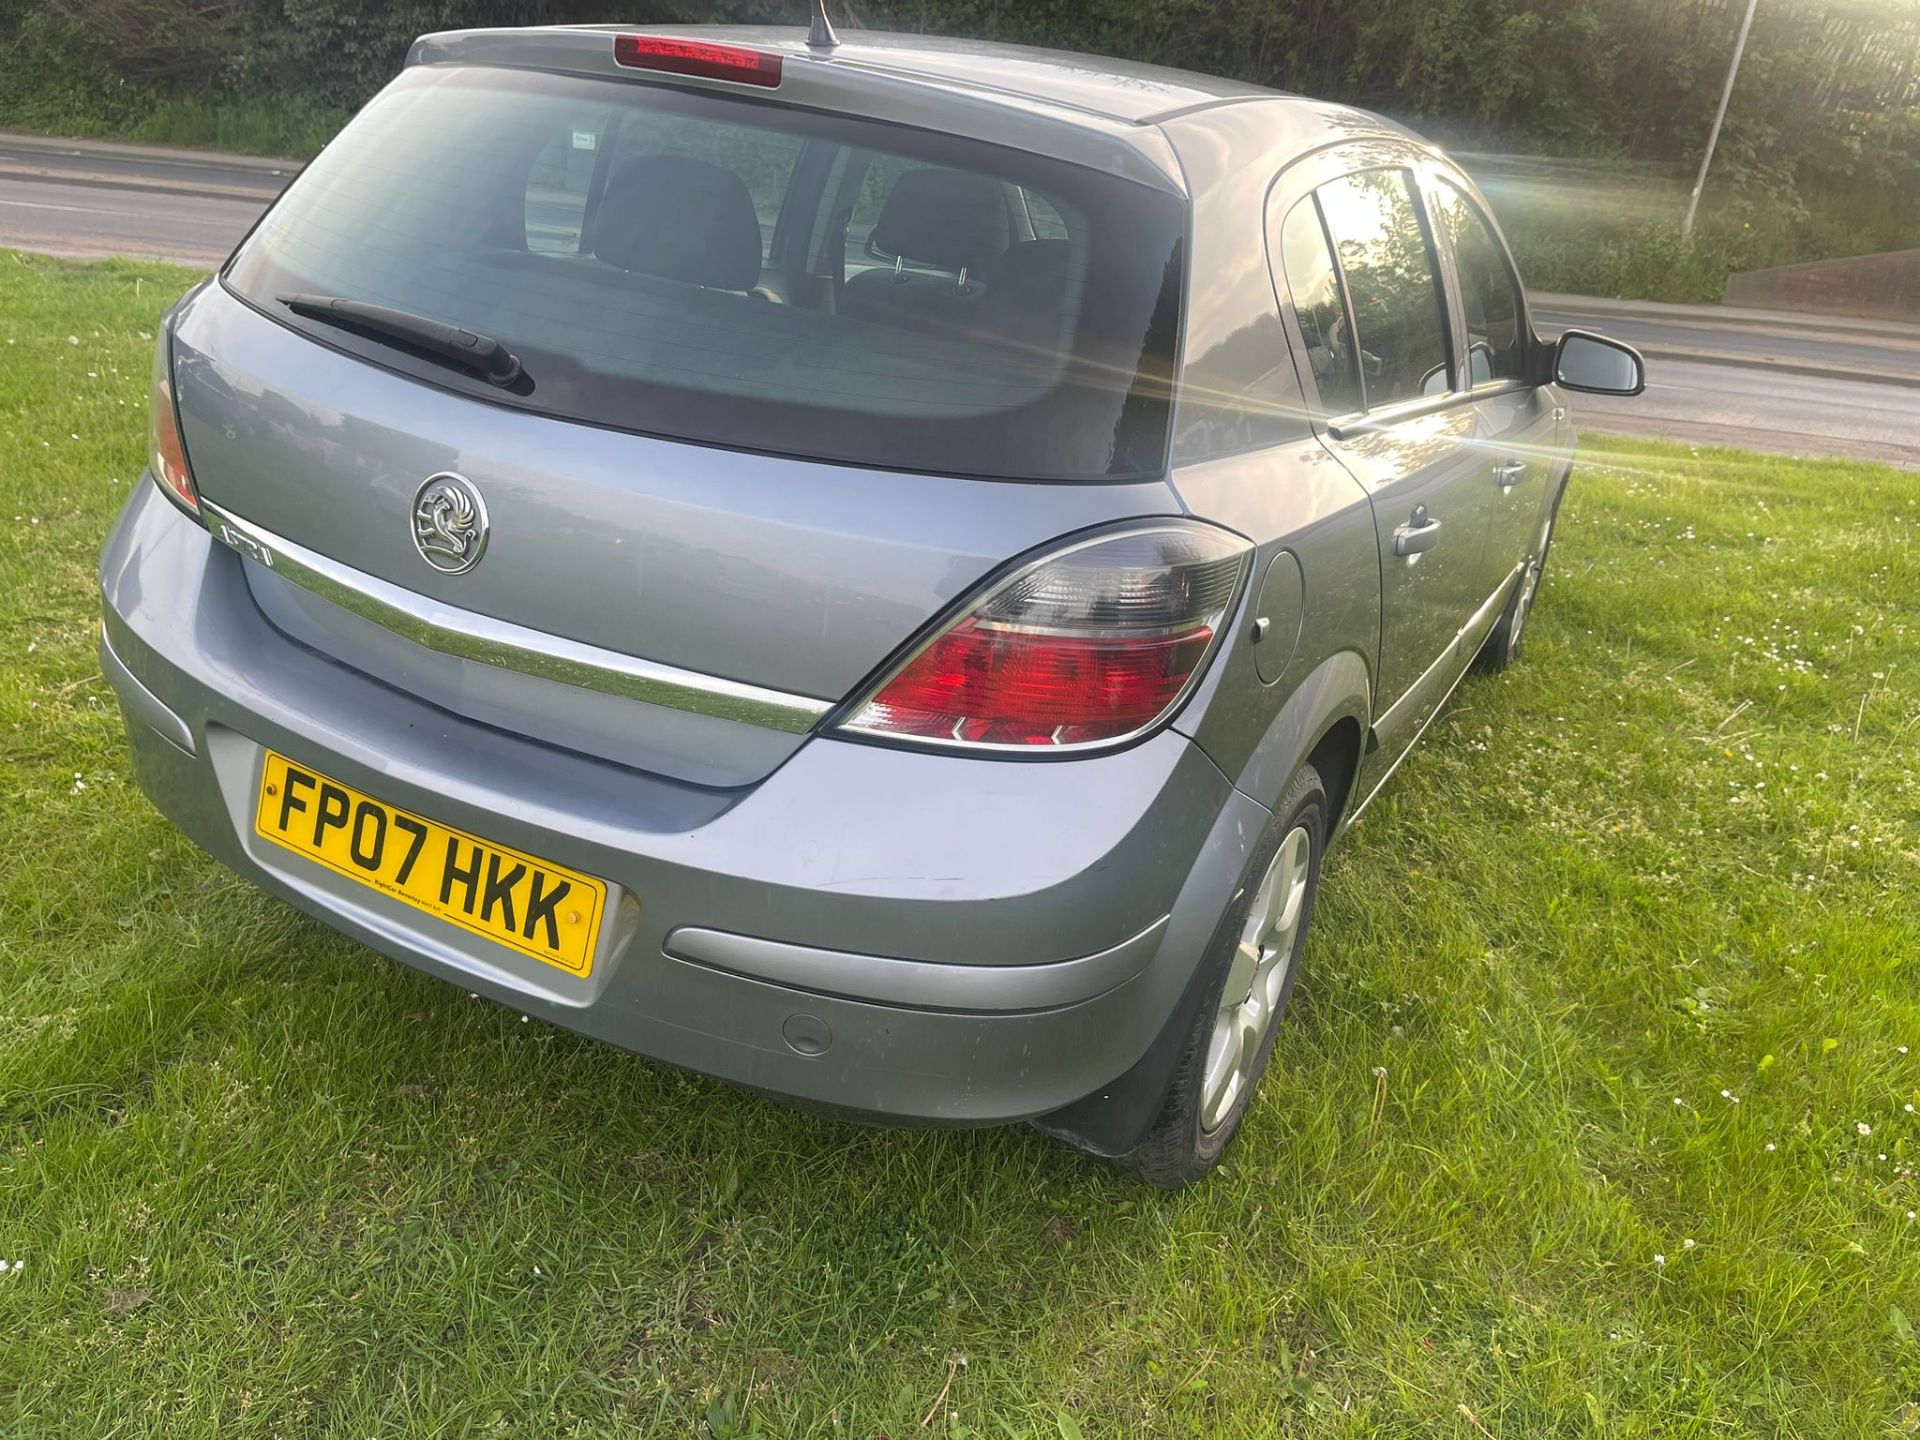 2007/07 REG VAUXHALL ASTRA CLUB TWINPORT 1.4 PETROL MANUAL HATCHBACK, SHOWING 2 FORMER KEEPERS - Image 3 of 7